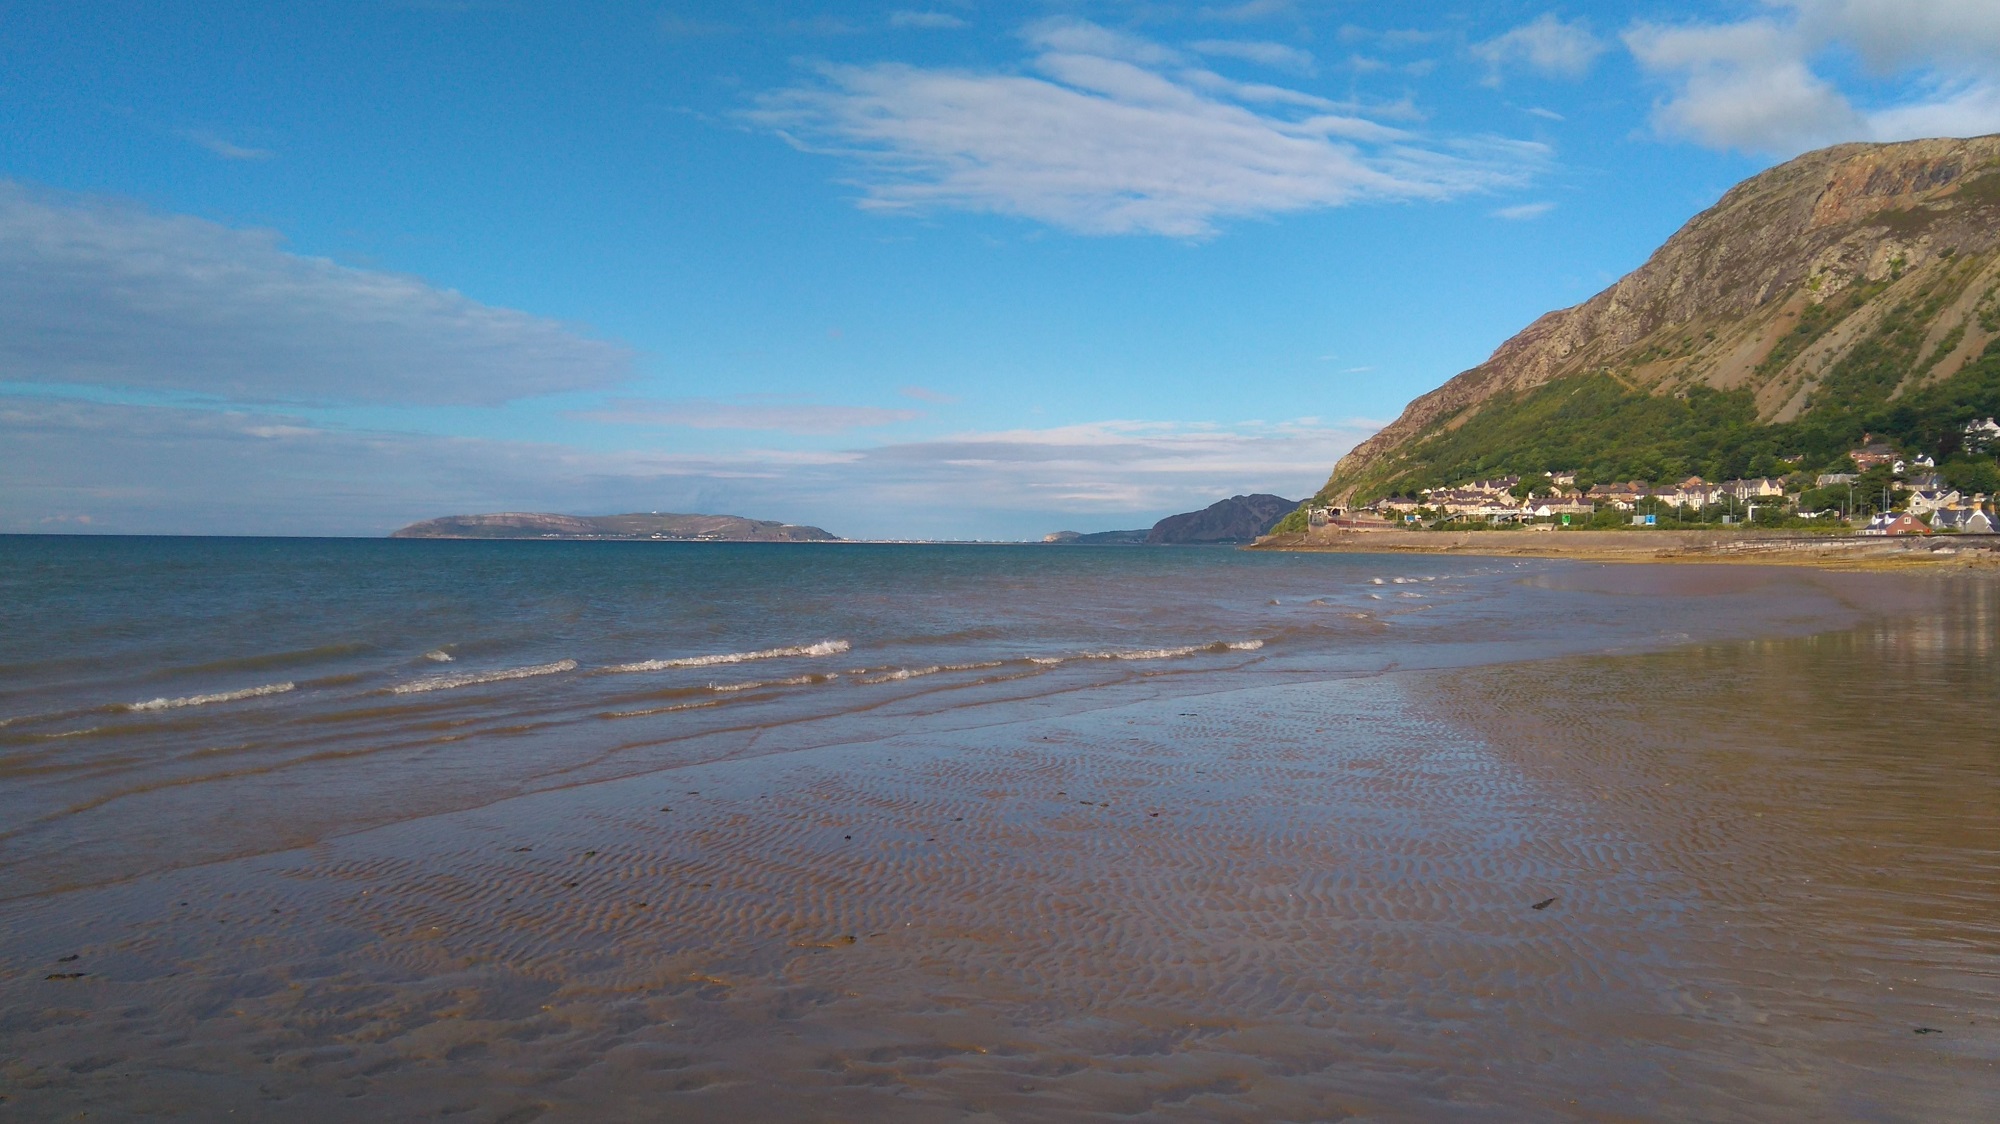 A Welsh mountainside meets the sea under blue skies on a summer day. In the foreground the sea washes across sand flats, while Llandudno is visible in the distance. Llanfairfechan, north Wales.